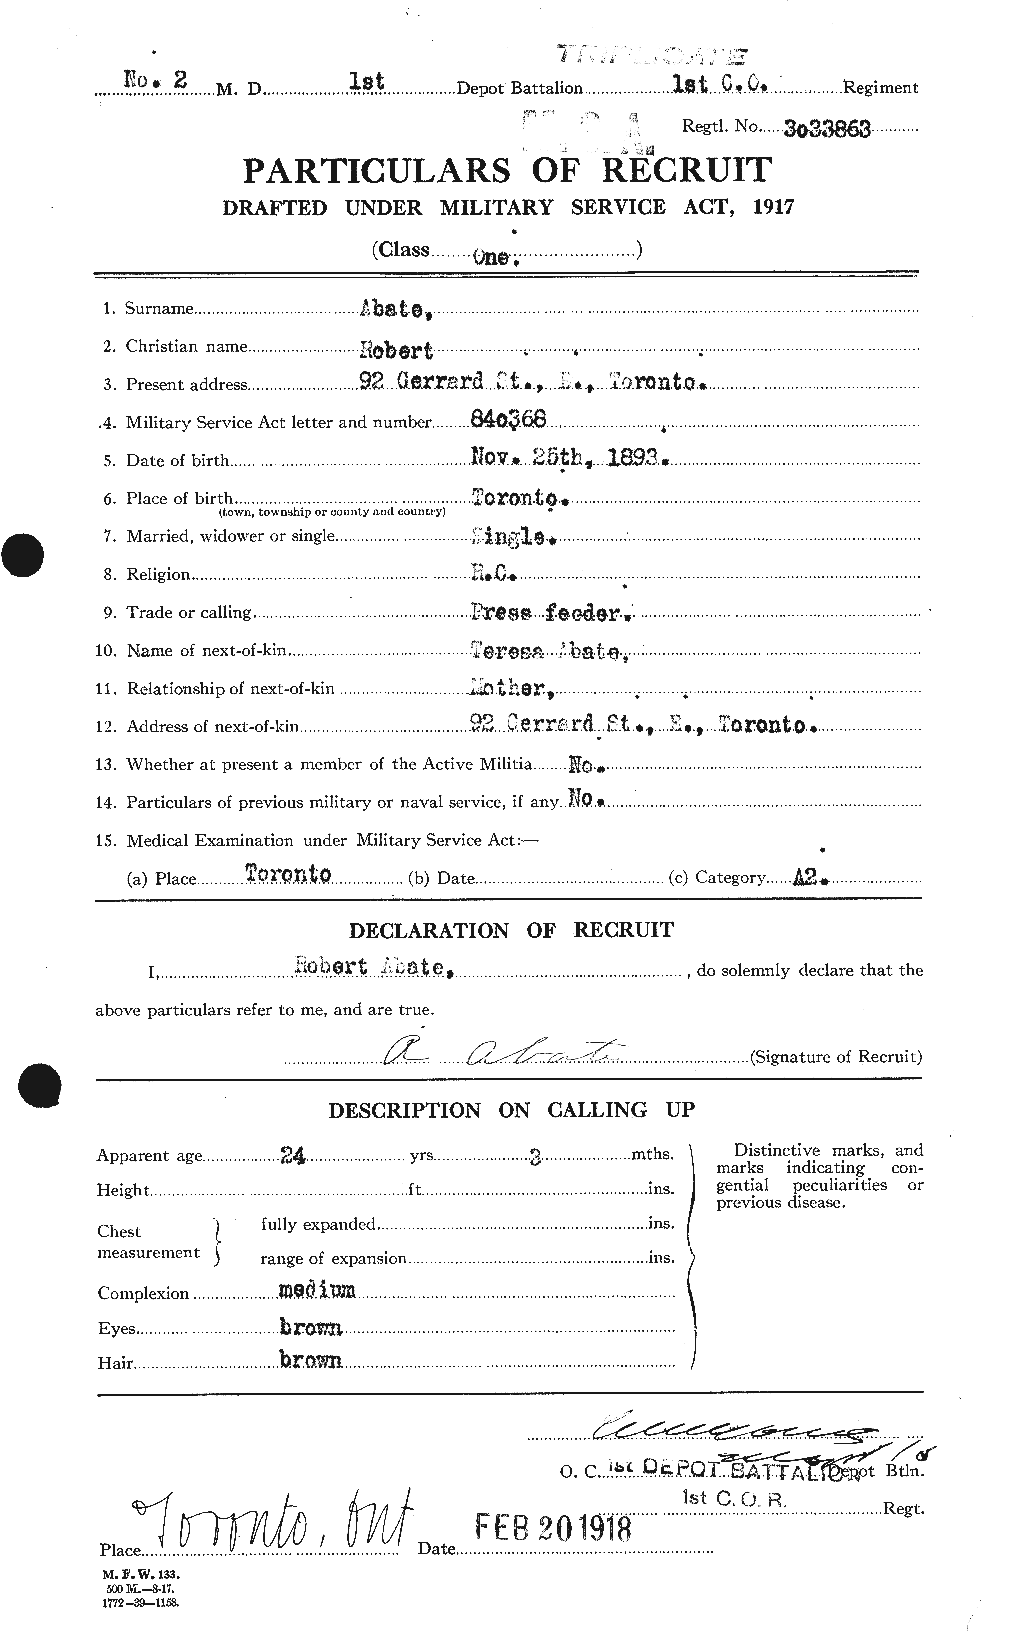 Personnel Records of the First World War - CEF 200763a